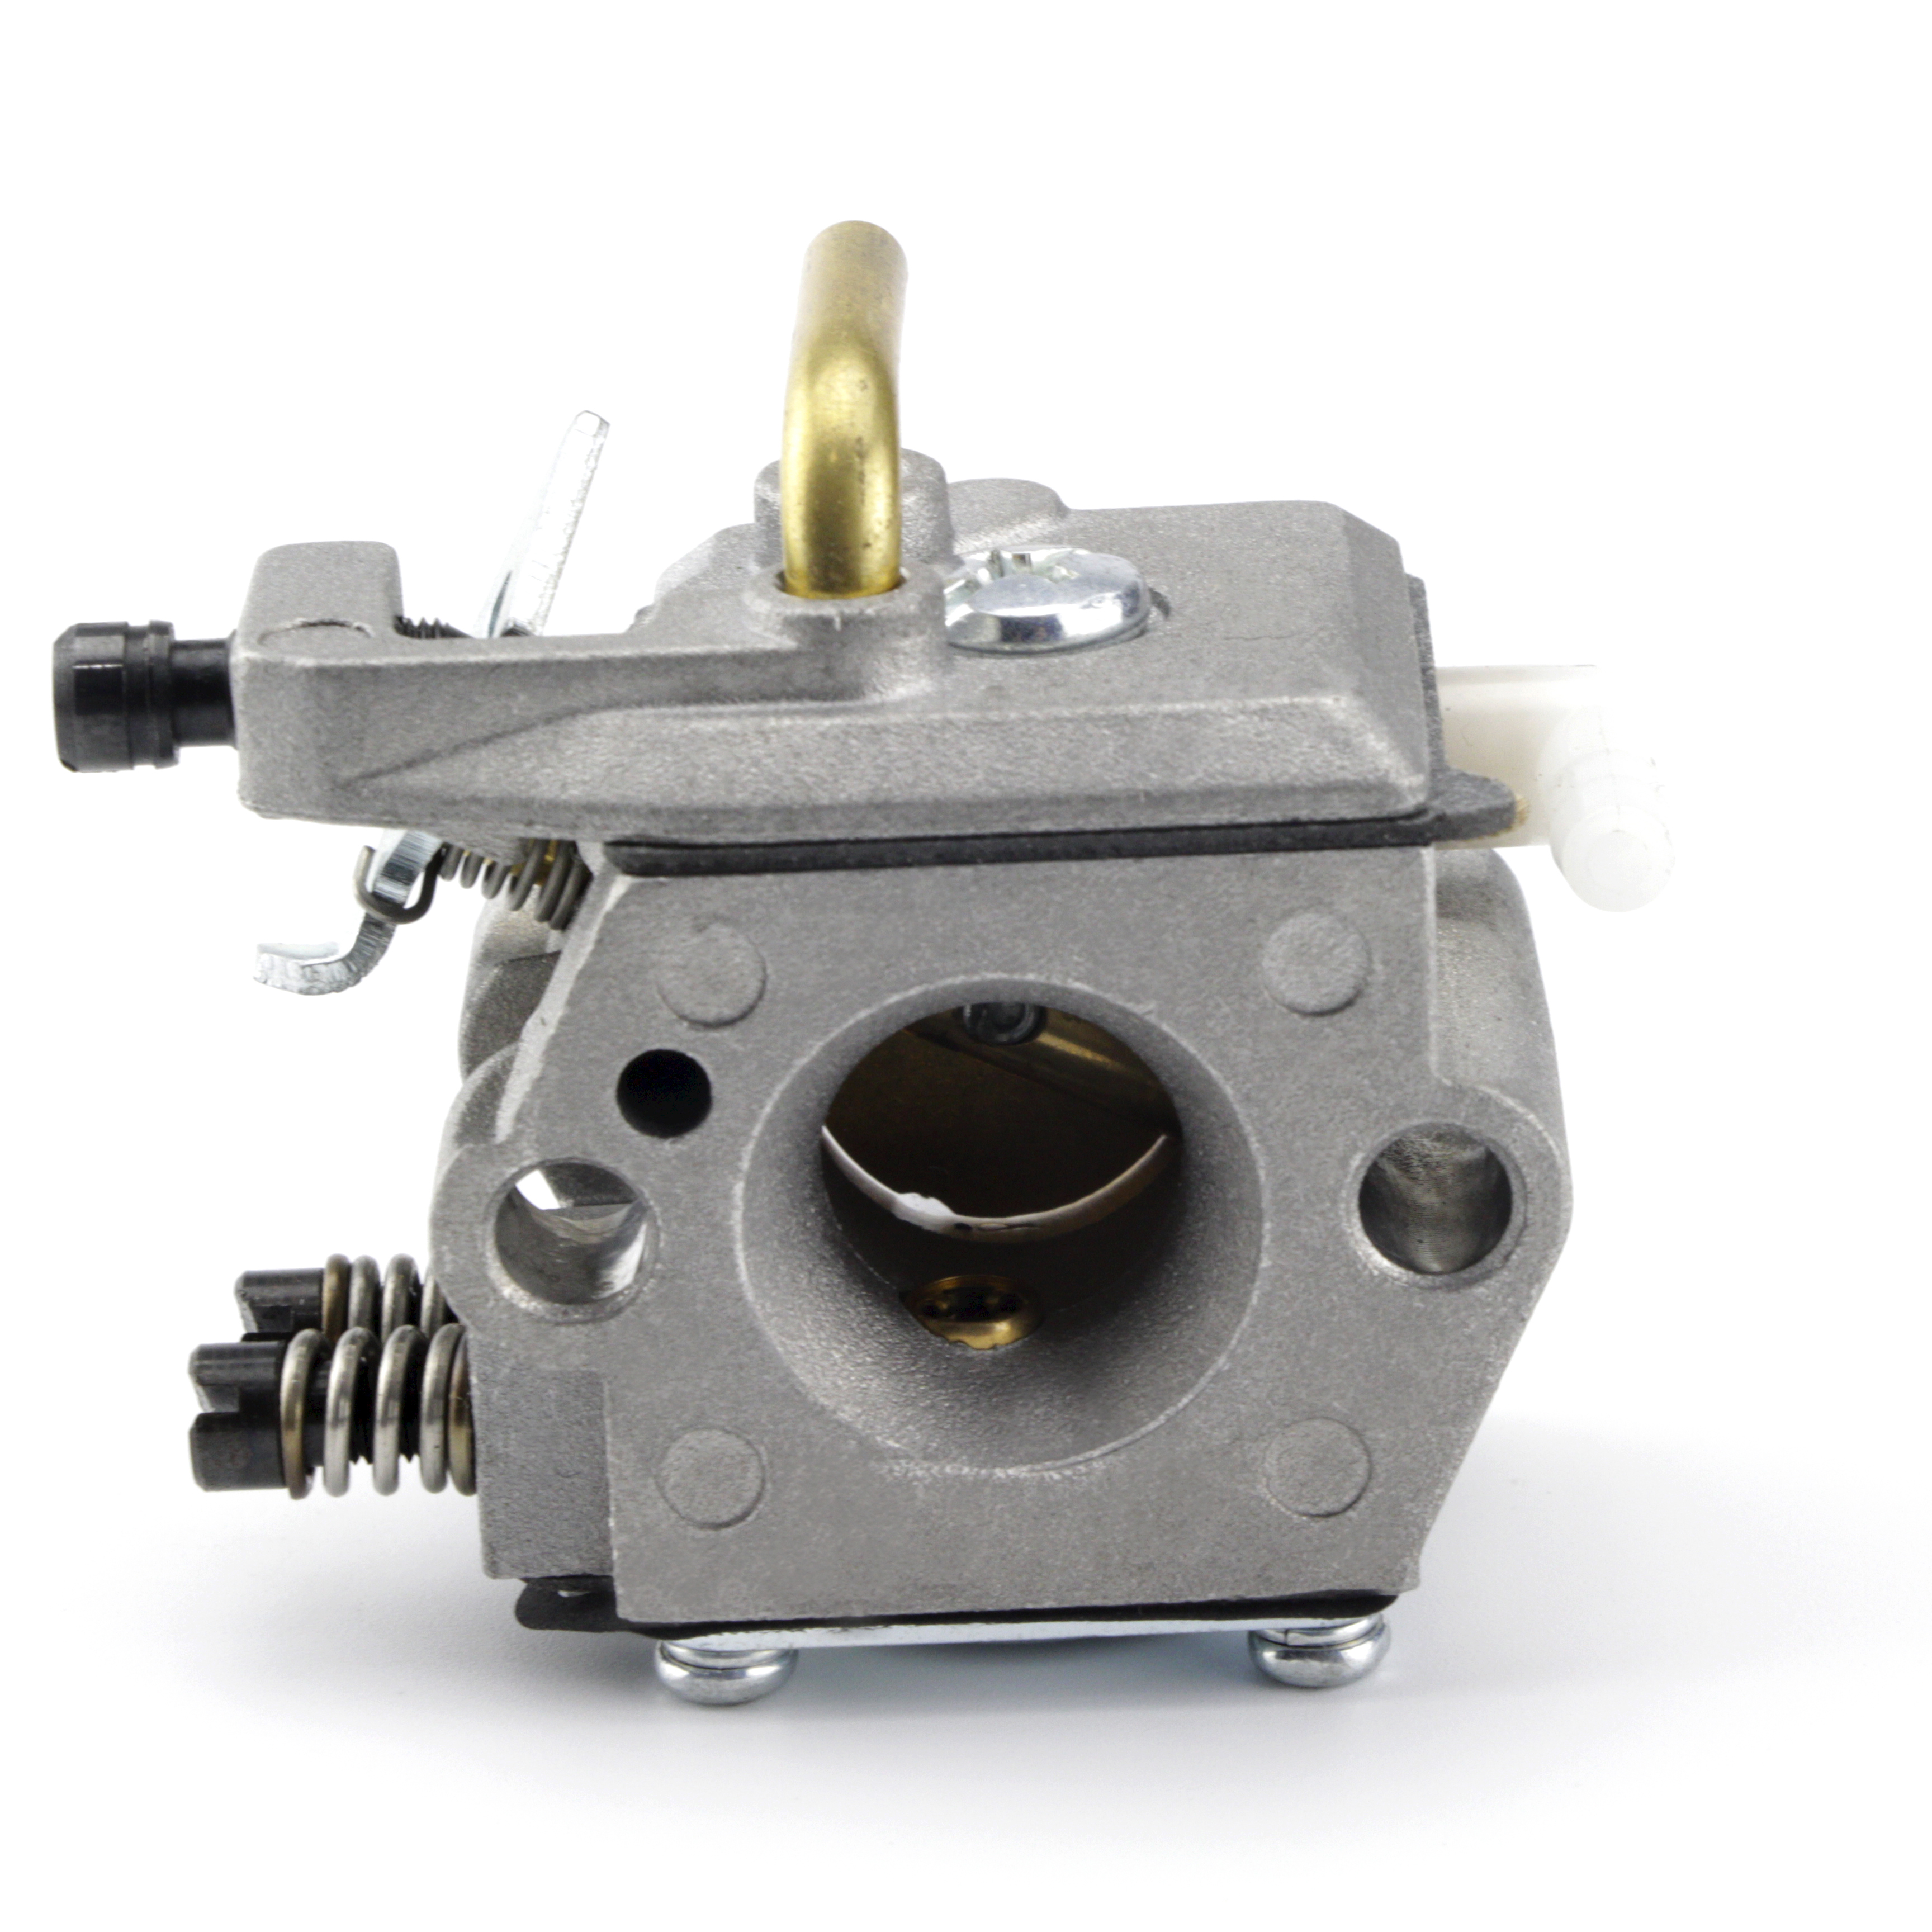 Carburetor For Stihl 024 026 024AV 024S MS240 MS260 Tillotson HU-136A HS-136A and Compatible With Walbro WT-194-1 WT-194 Carb Replace # 1121 120 0611